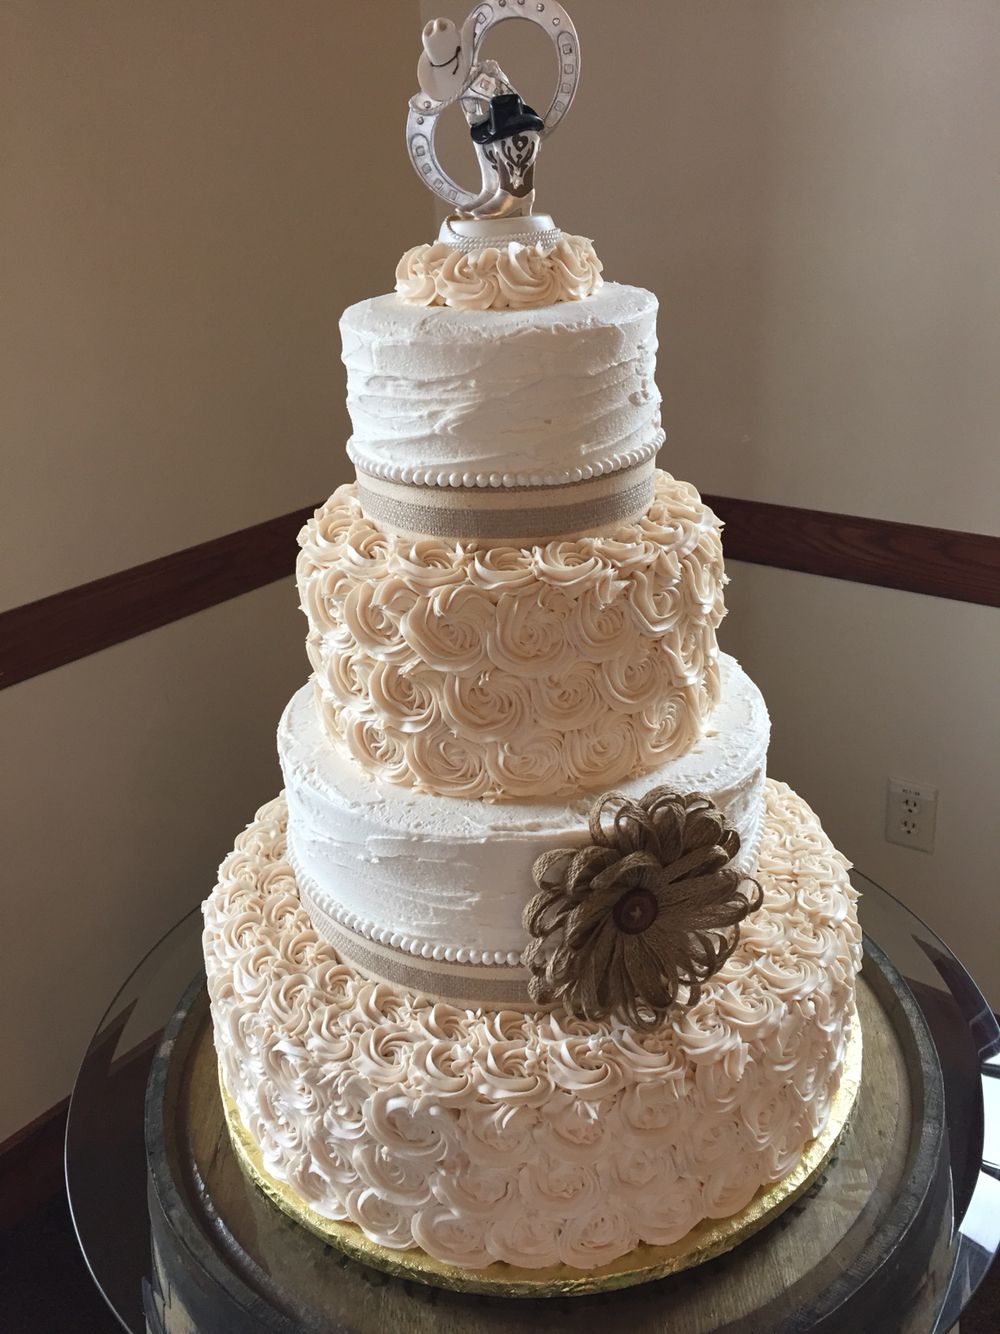 6" 9" 12" 16"  stacked Buttercream Wedding Cake. Made by Glaus Bakery